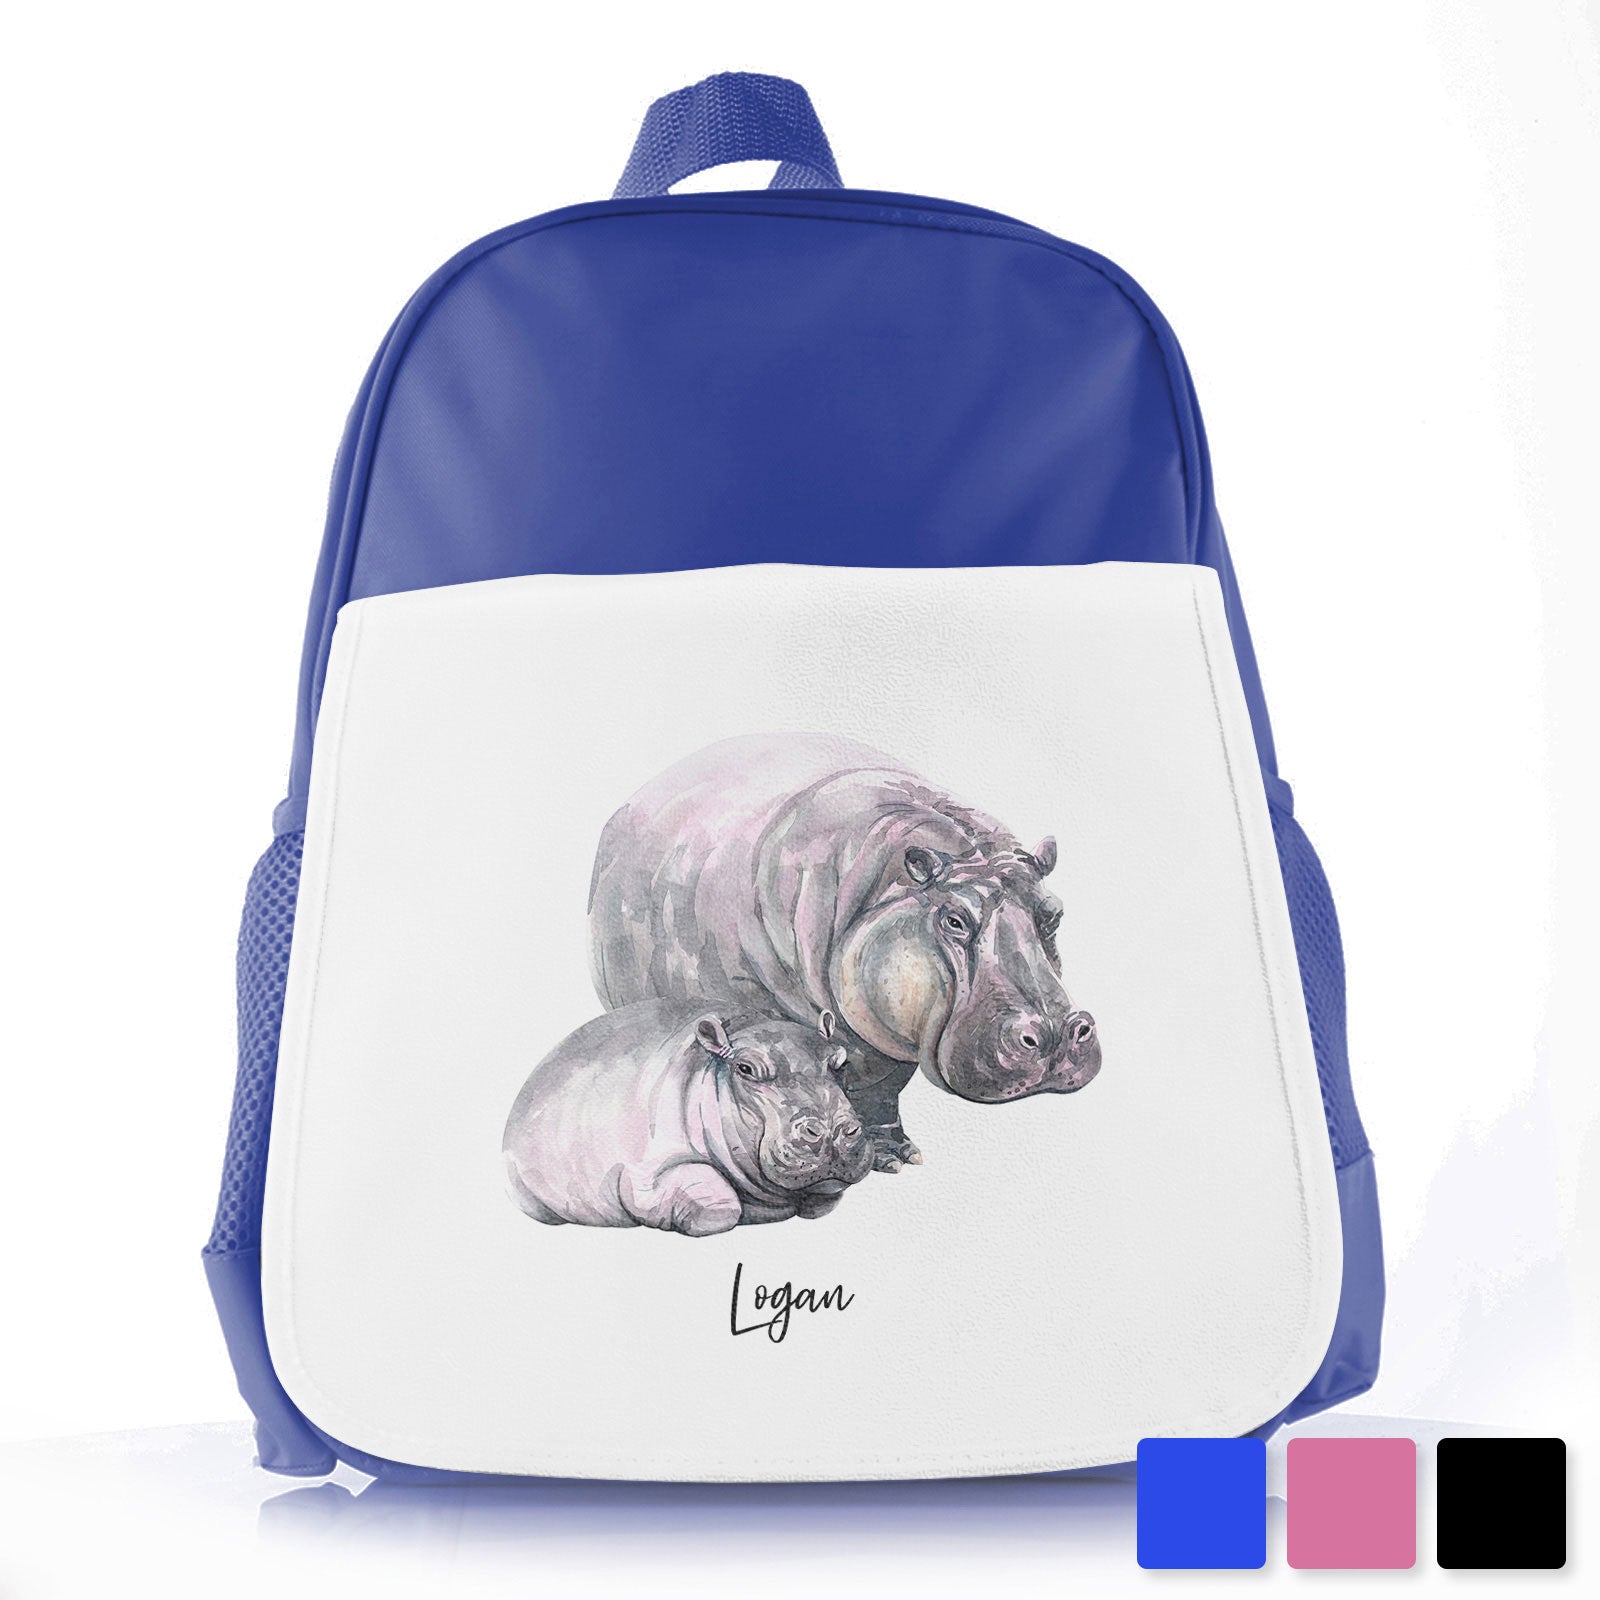 Personalised School Bag/Rucksack with Welcoming Text and Relaxing Mum and Baby Hippos